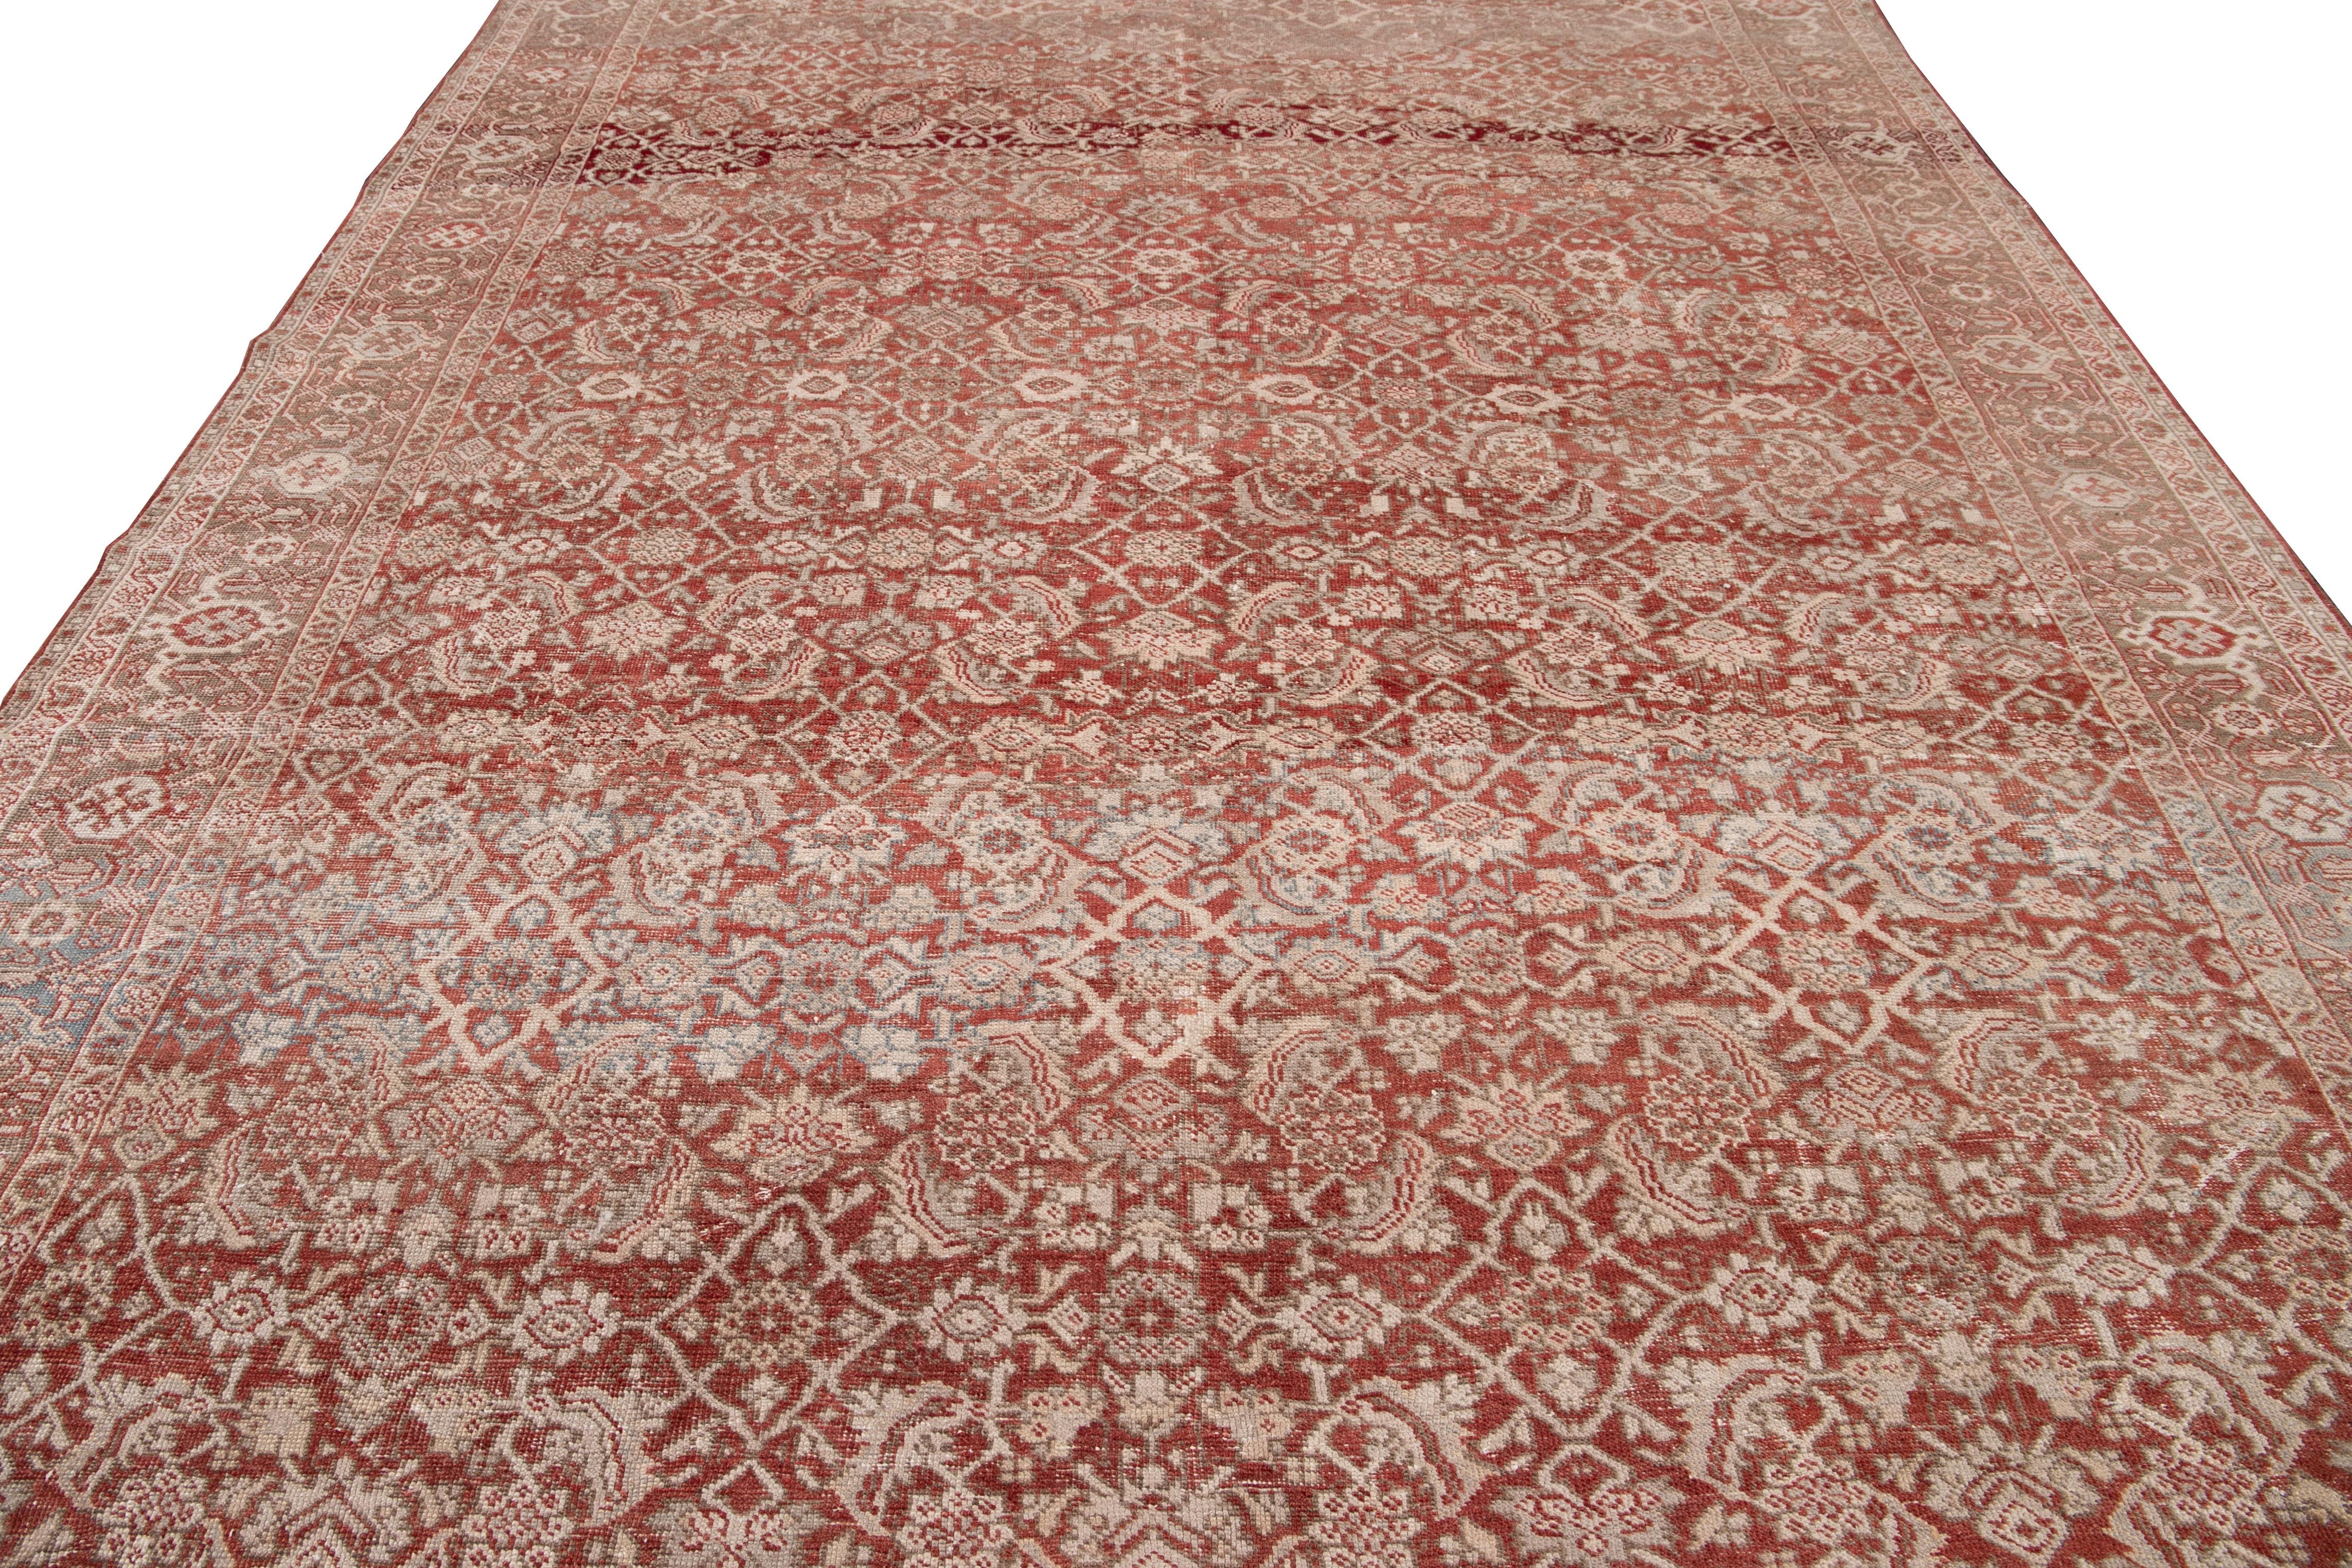 Islamic Antique Mahal Red Handmade Wool Rug For Sale